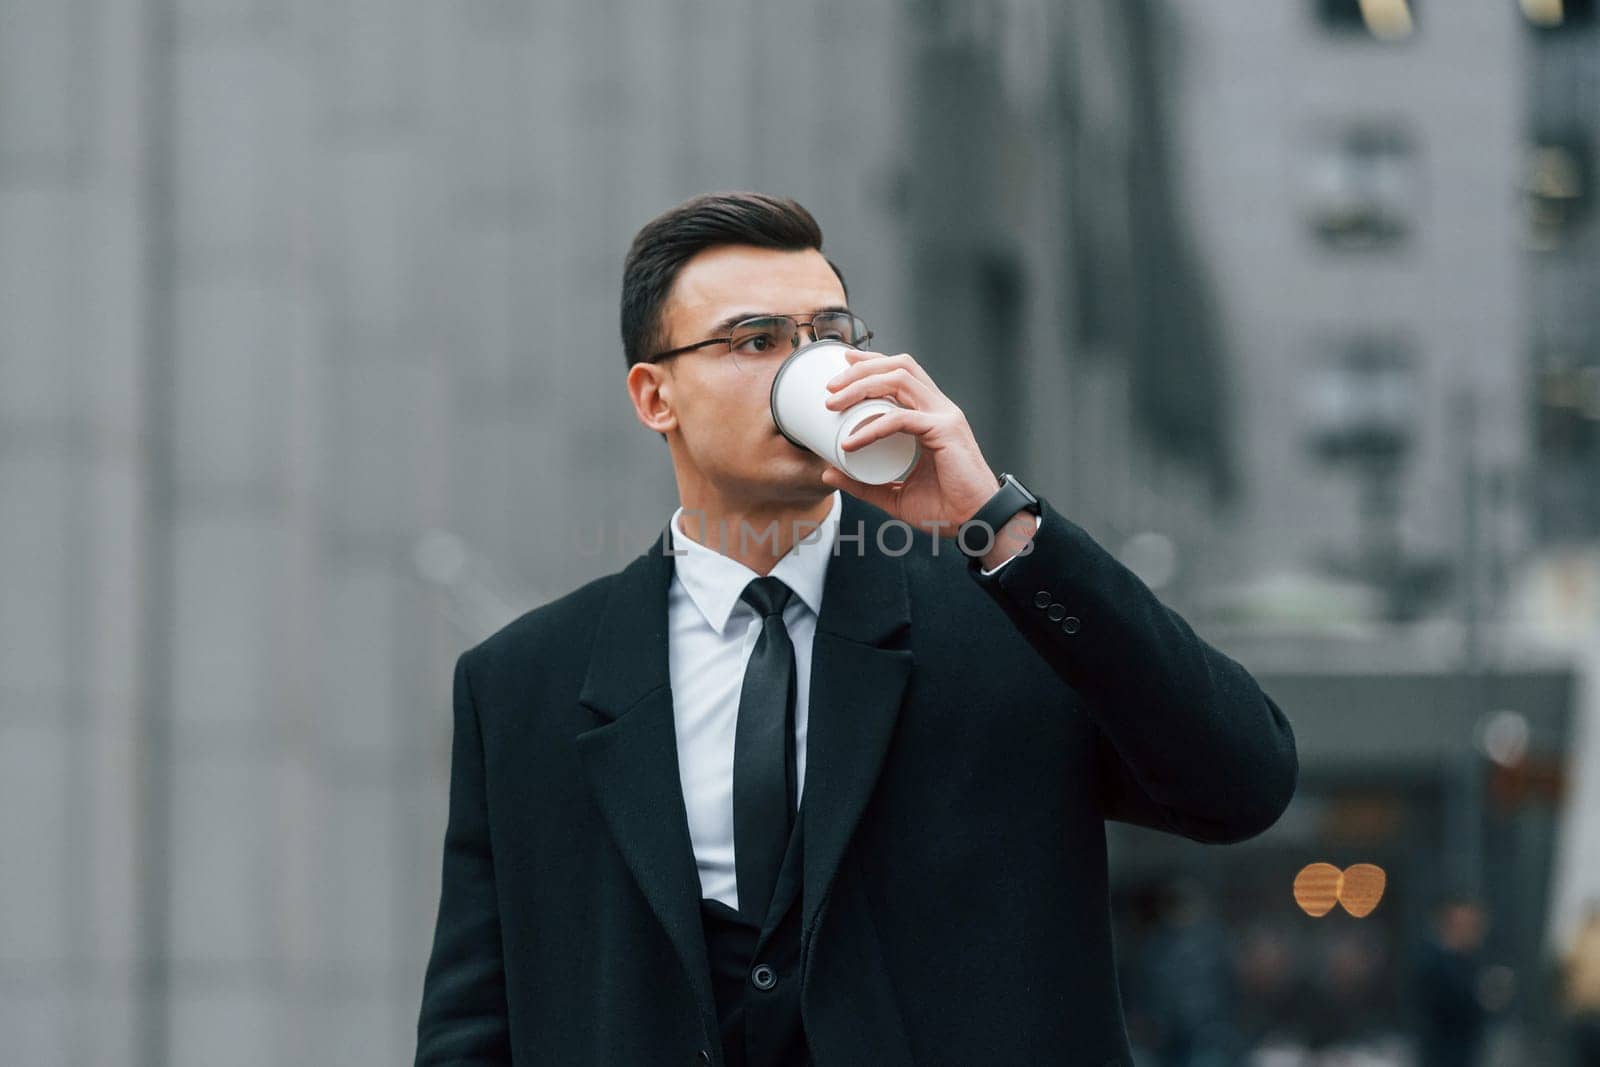 With cup of drink. Businessman in black suit and tie is outdoors in the city by Standret